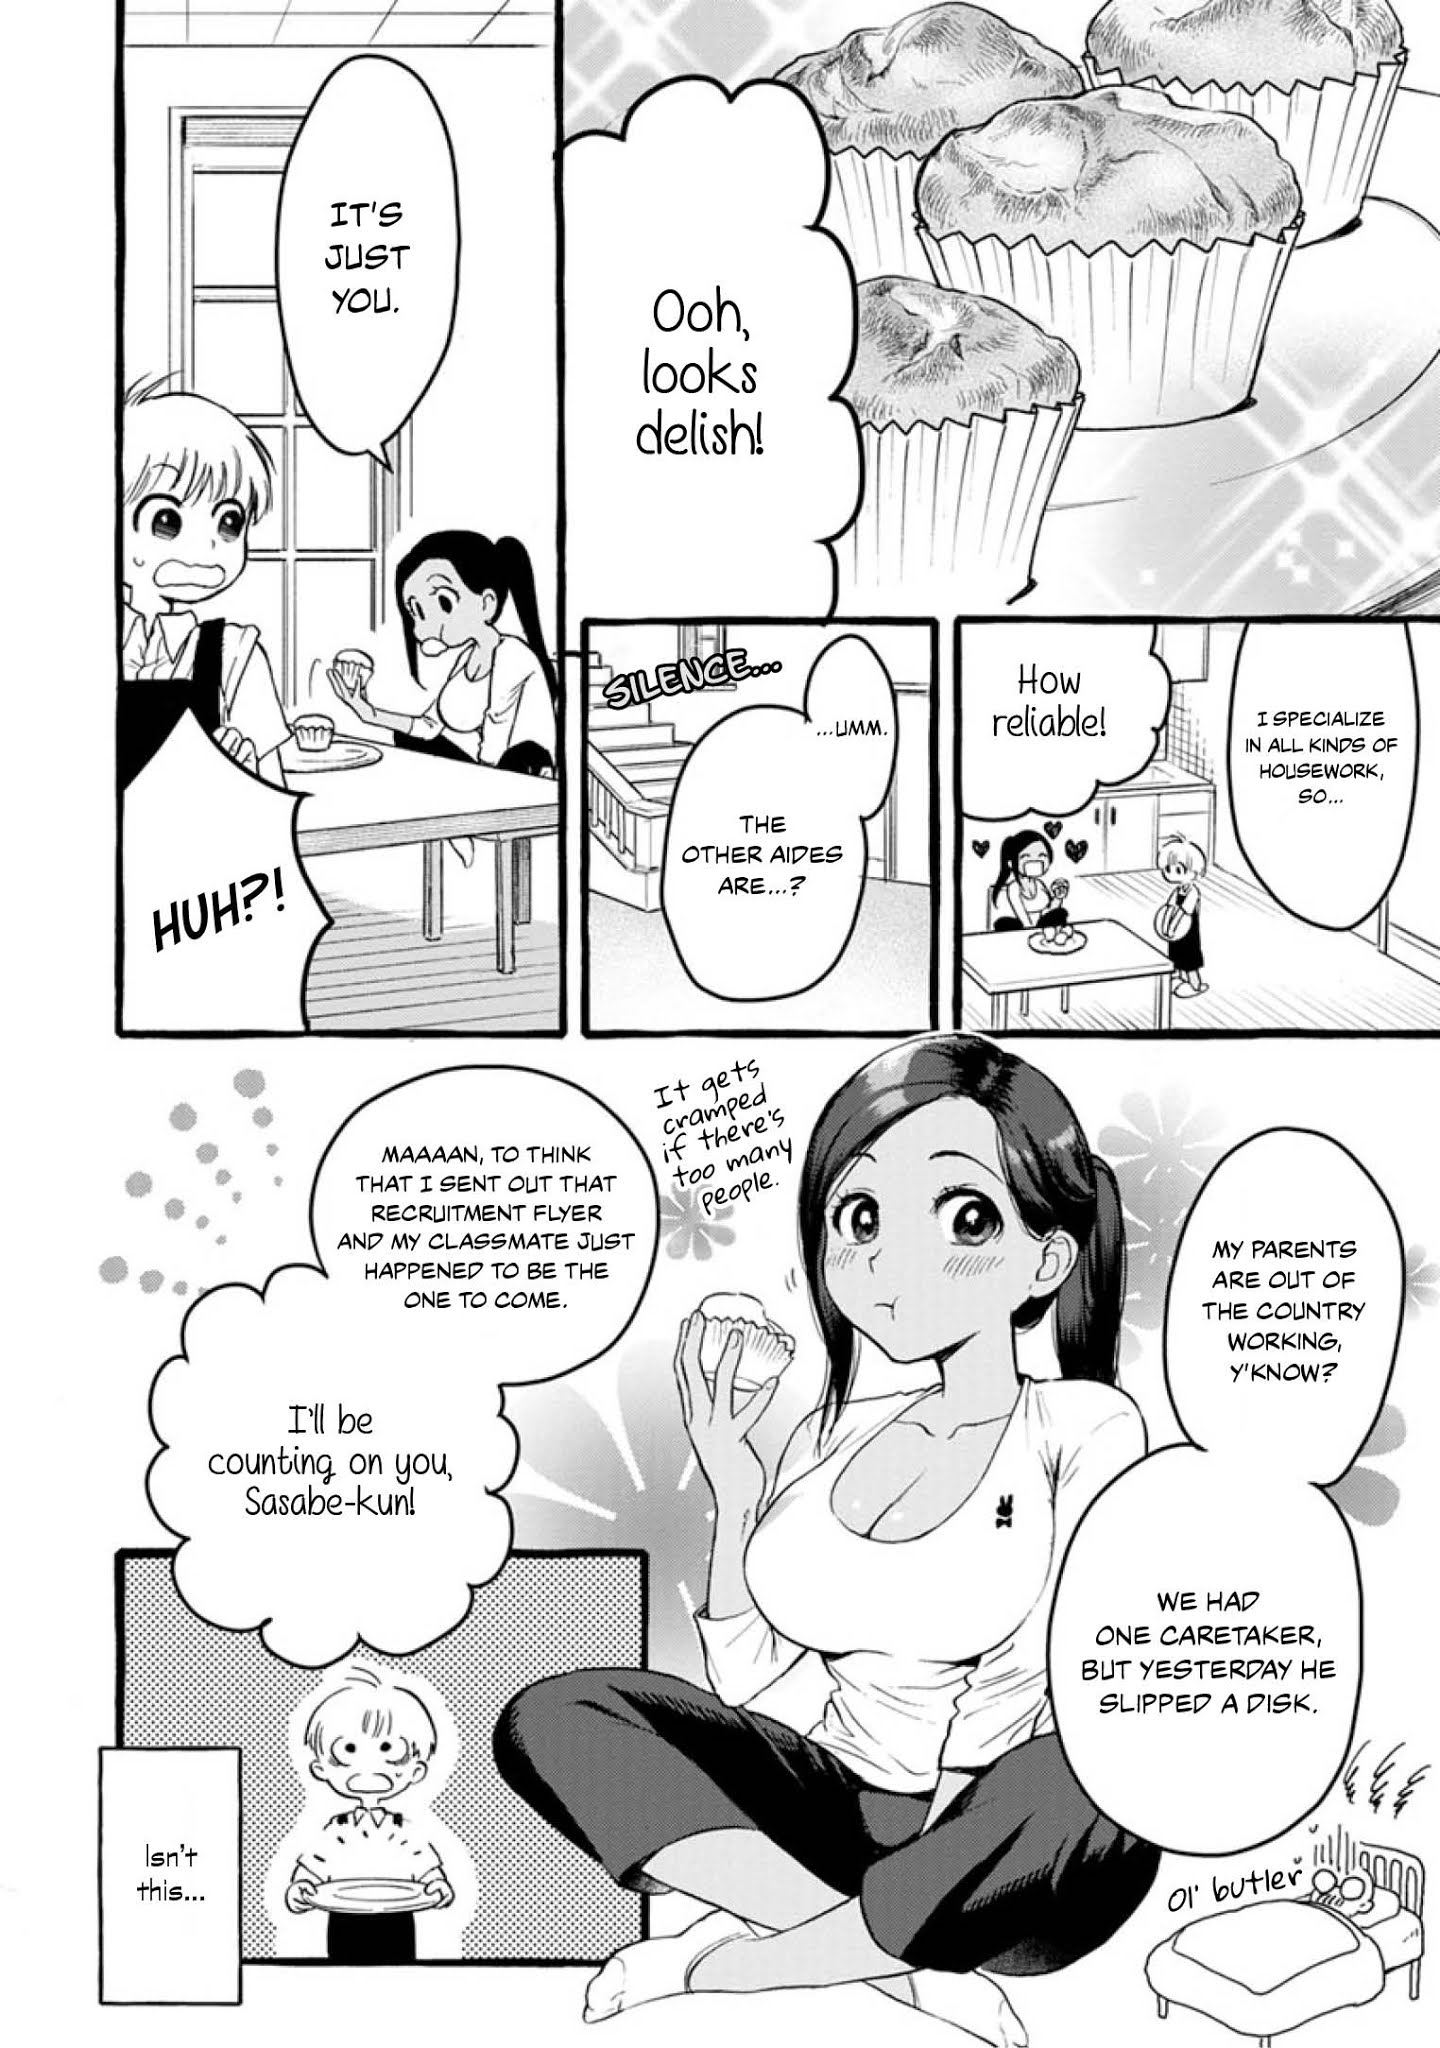 Show Me Your Boobies And Look Embarrassed! - Page 2